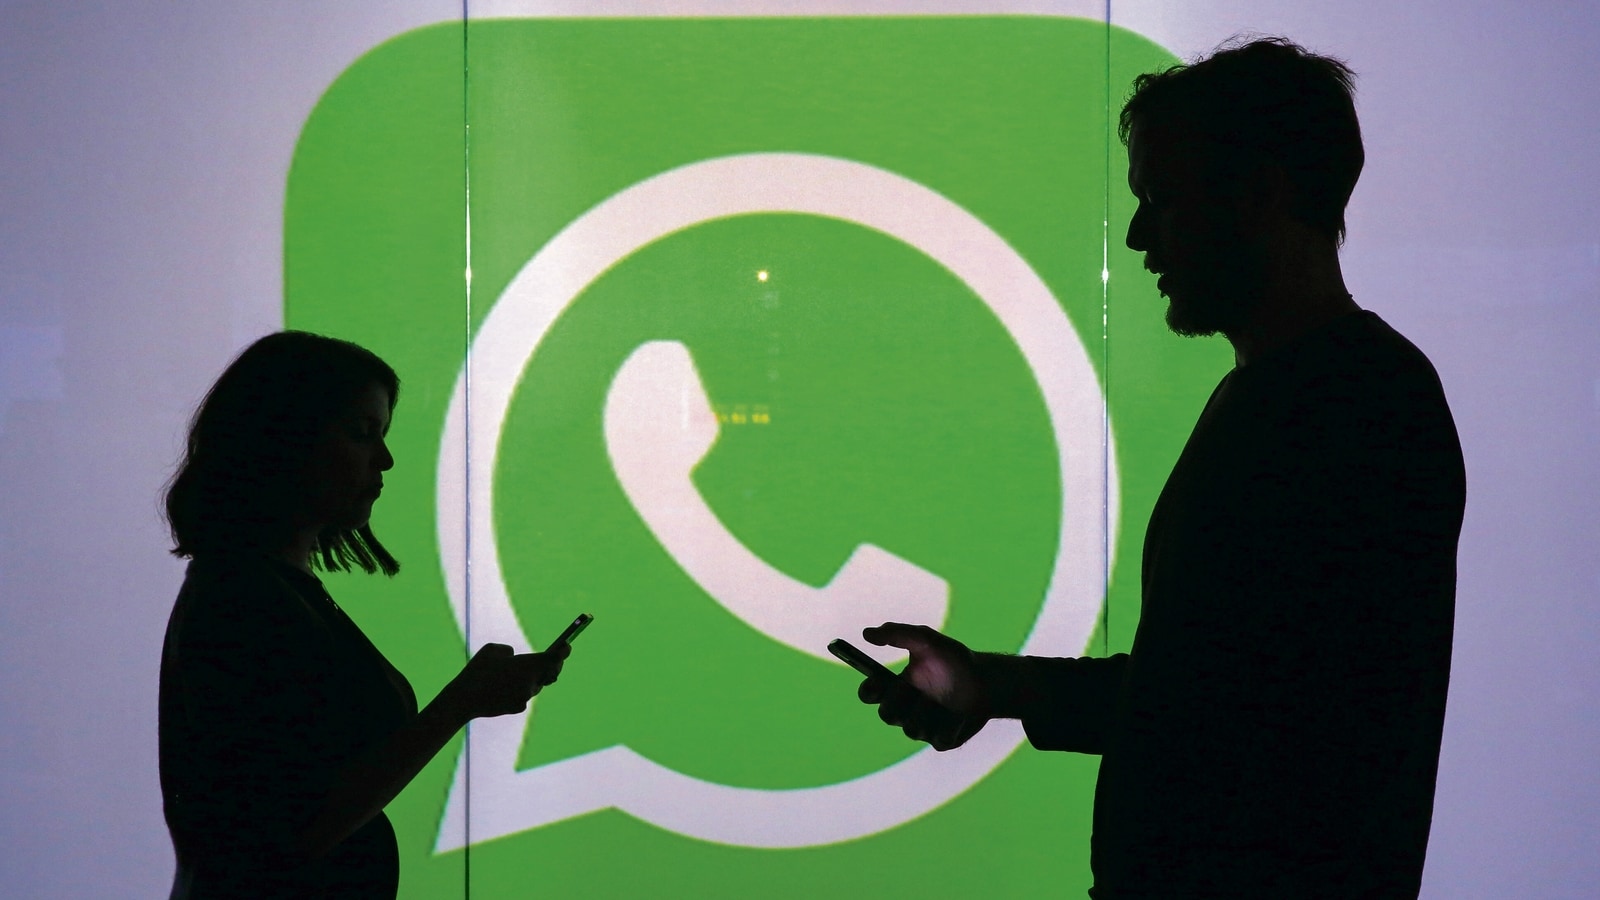 How To See People’s WhatsaApp Status Without Letting Them Know?